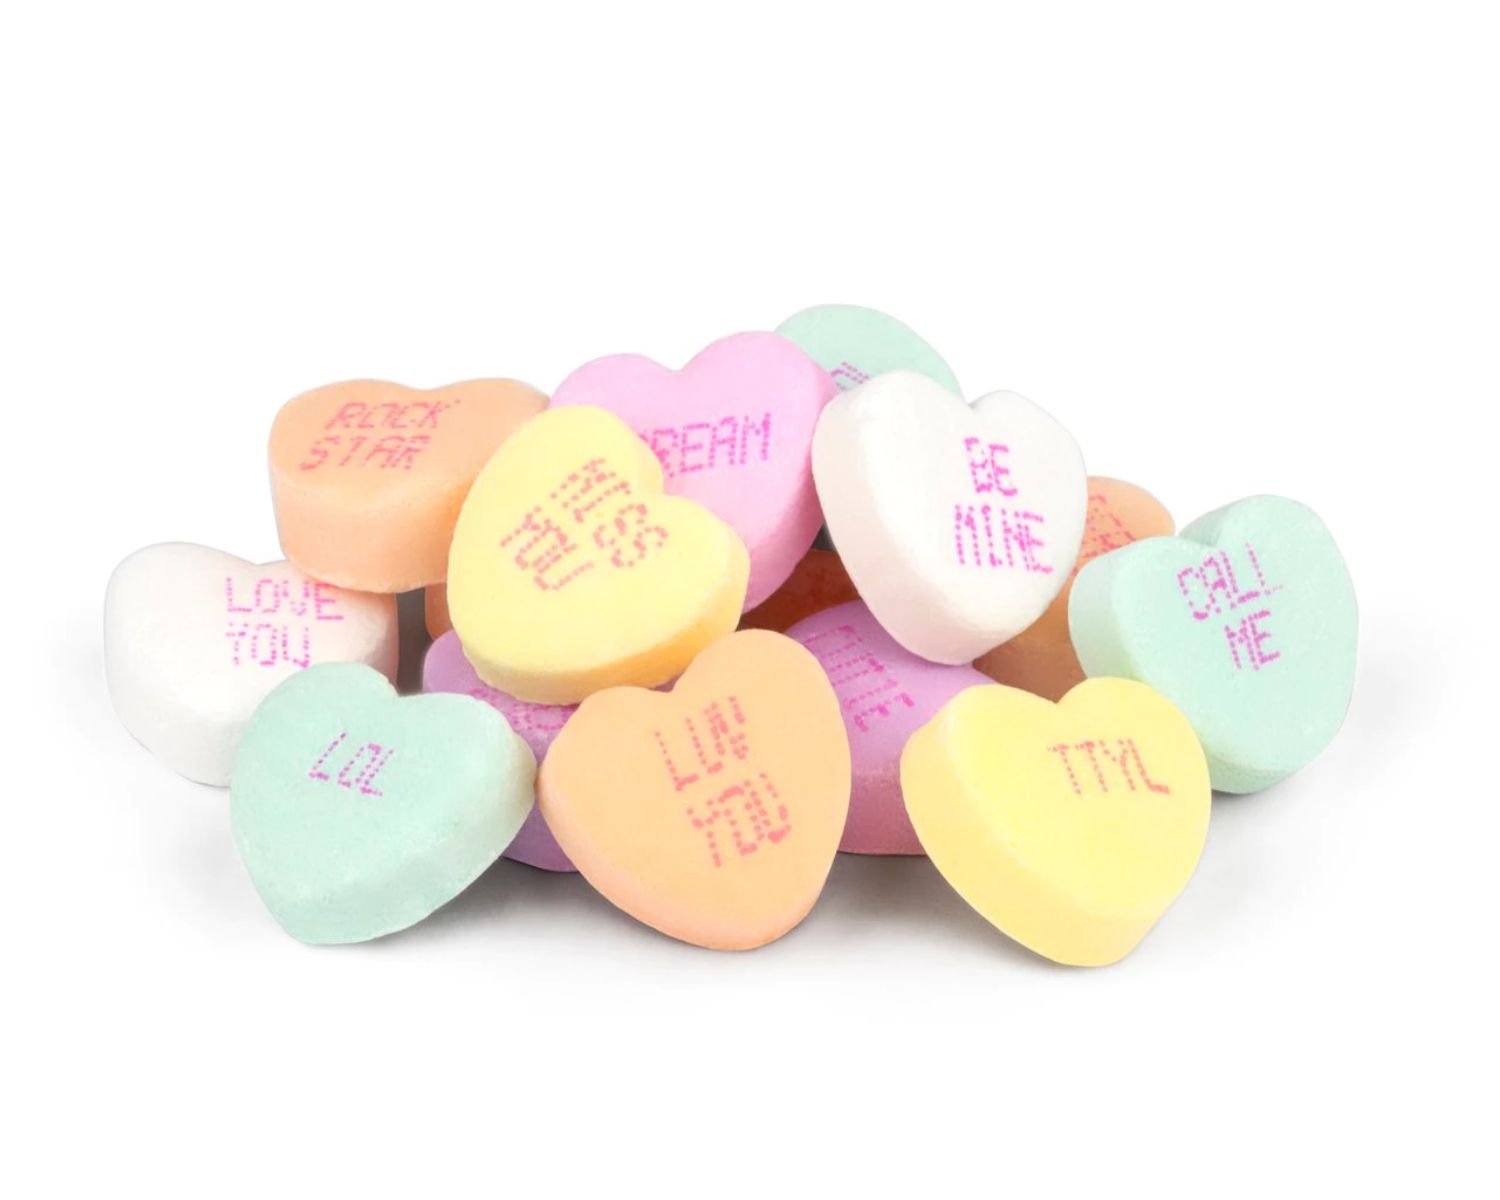 10-conversation-hearts-nutrition-facts